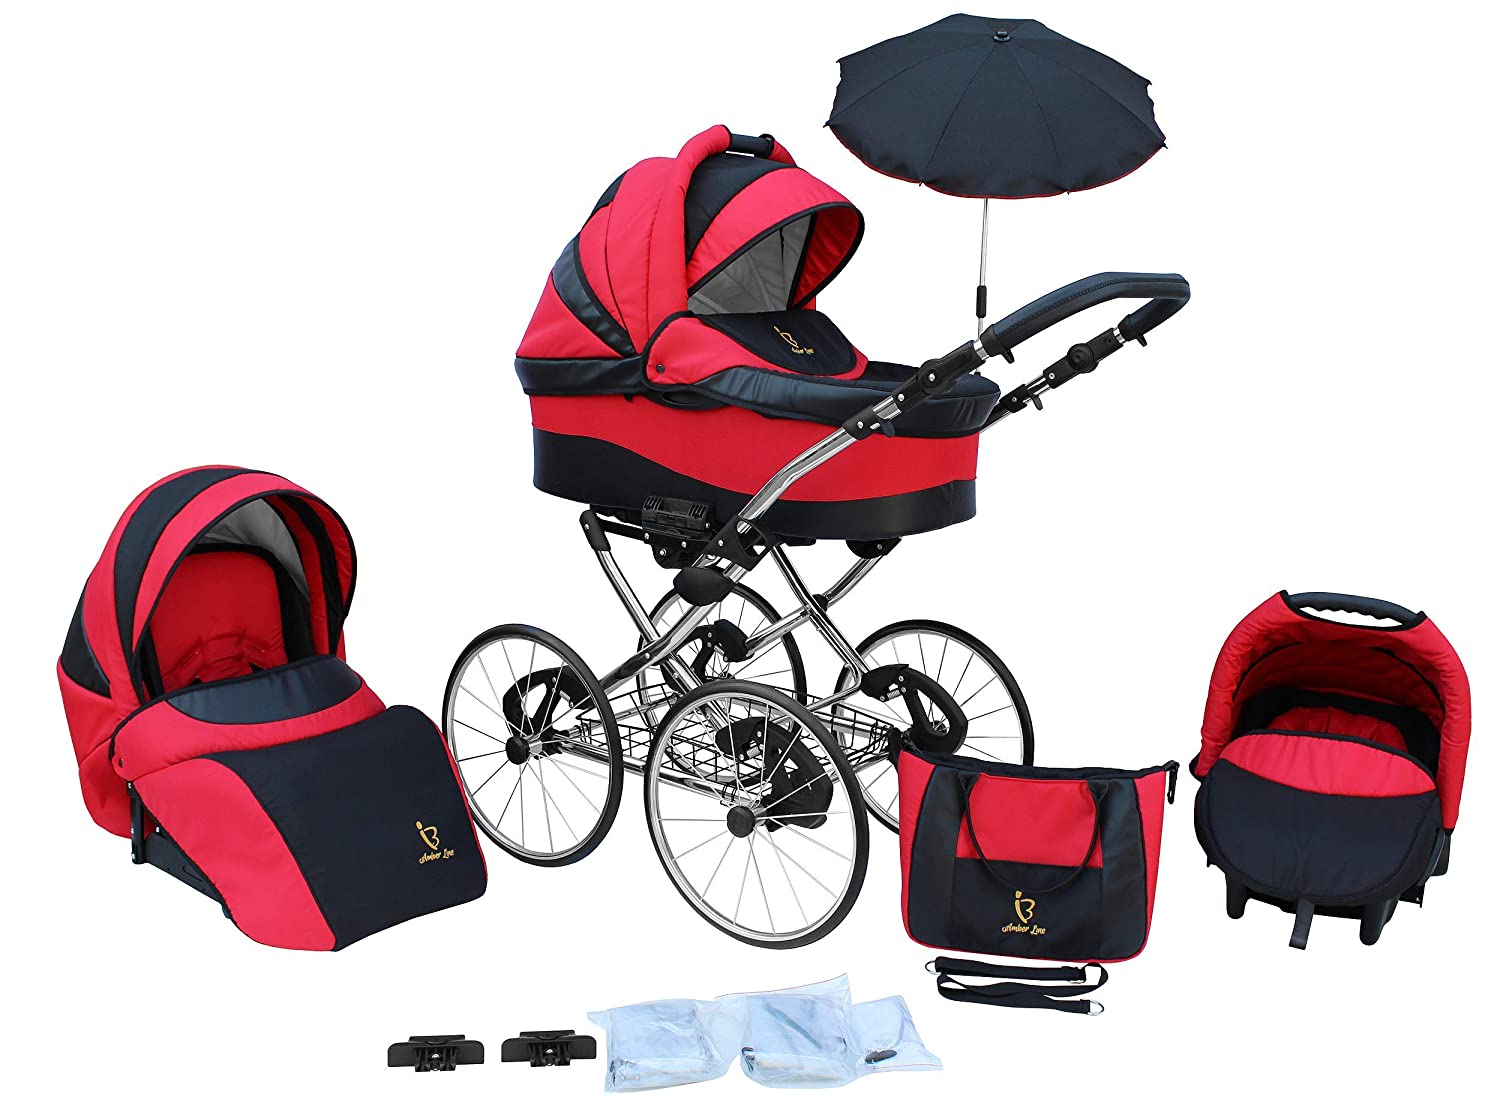 SKYLINE Classic Retro Style Combination Pram Buggy 3-in-1 Travel System Car Seat (Isofix) (Red / 17 Inch Hard Rubber Tyres)